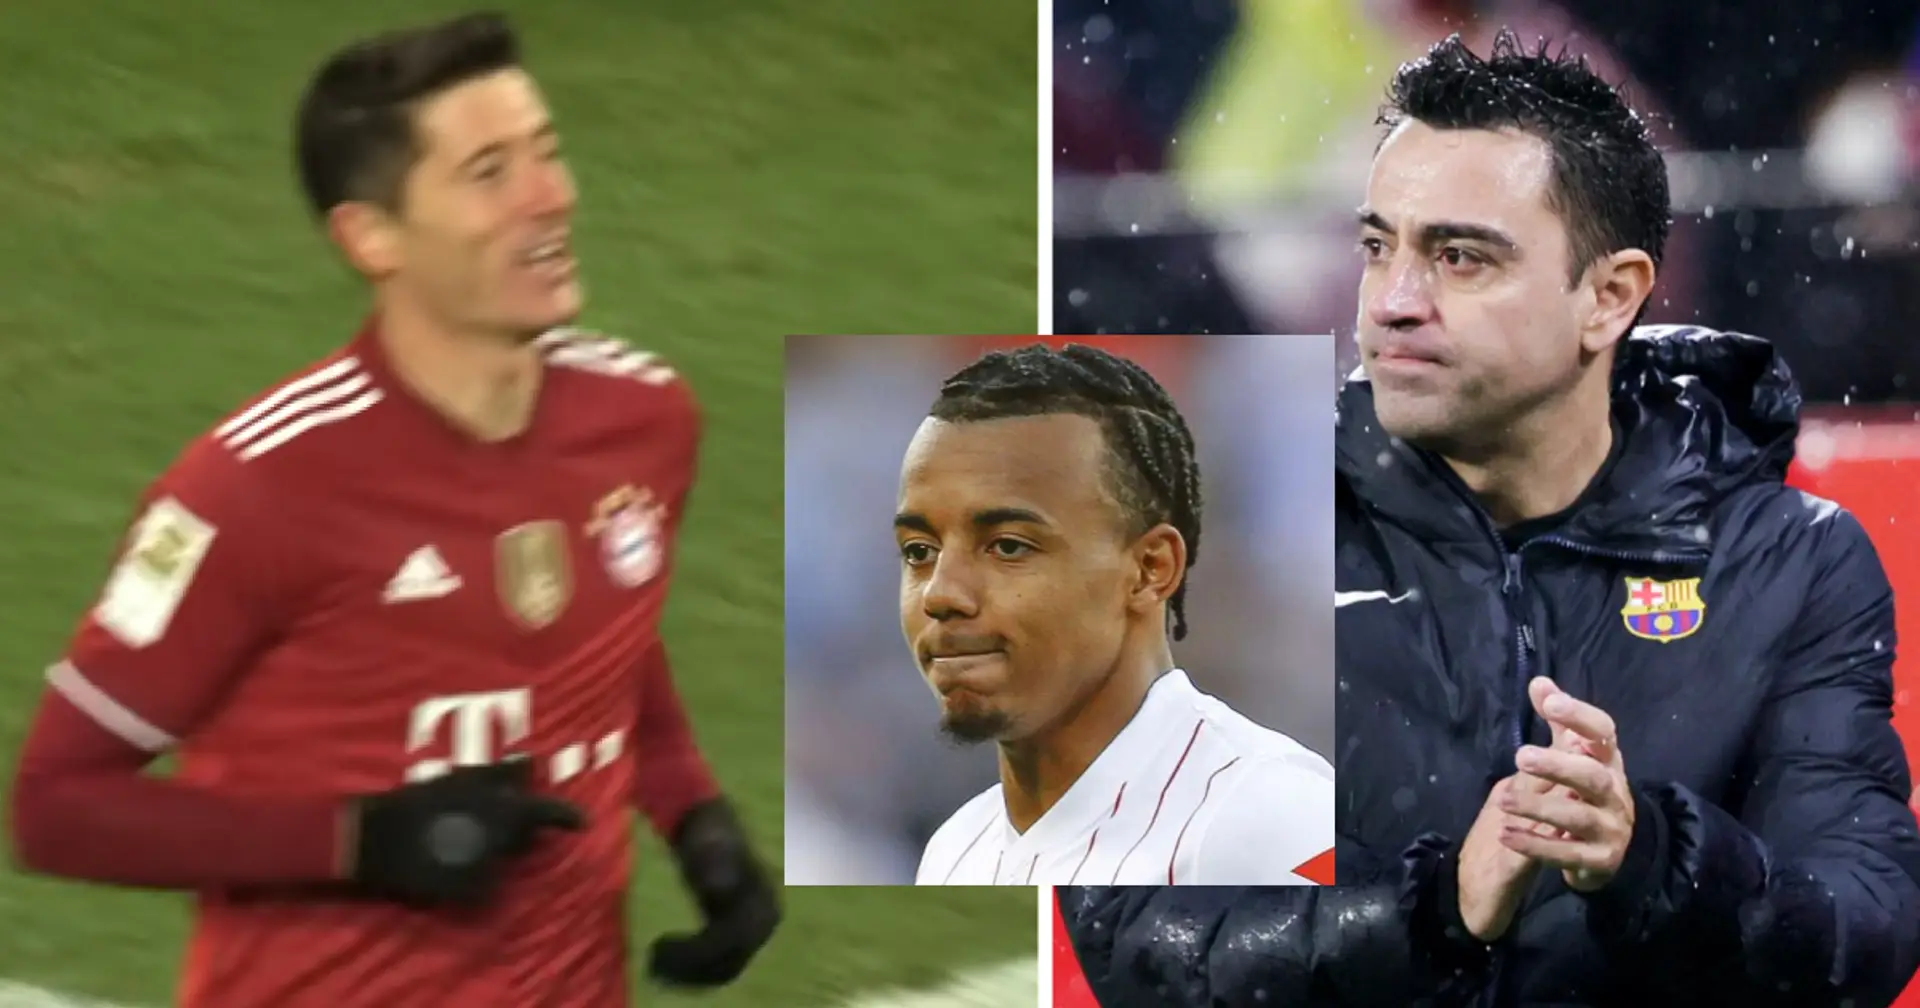 Announce 2 signings, bid for Lewandowski: Barca's to-do list after salary cuts